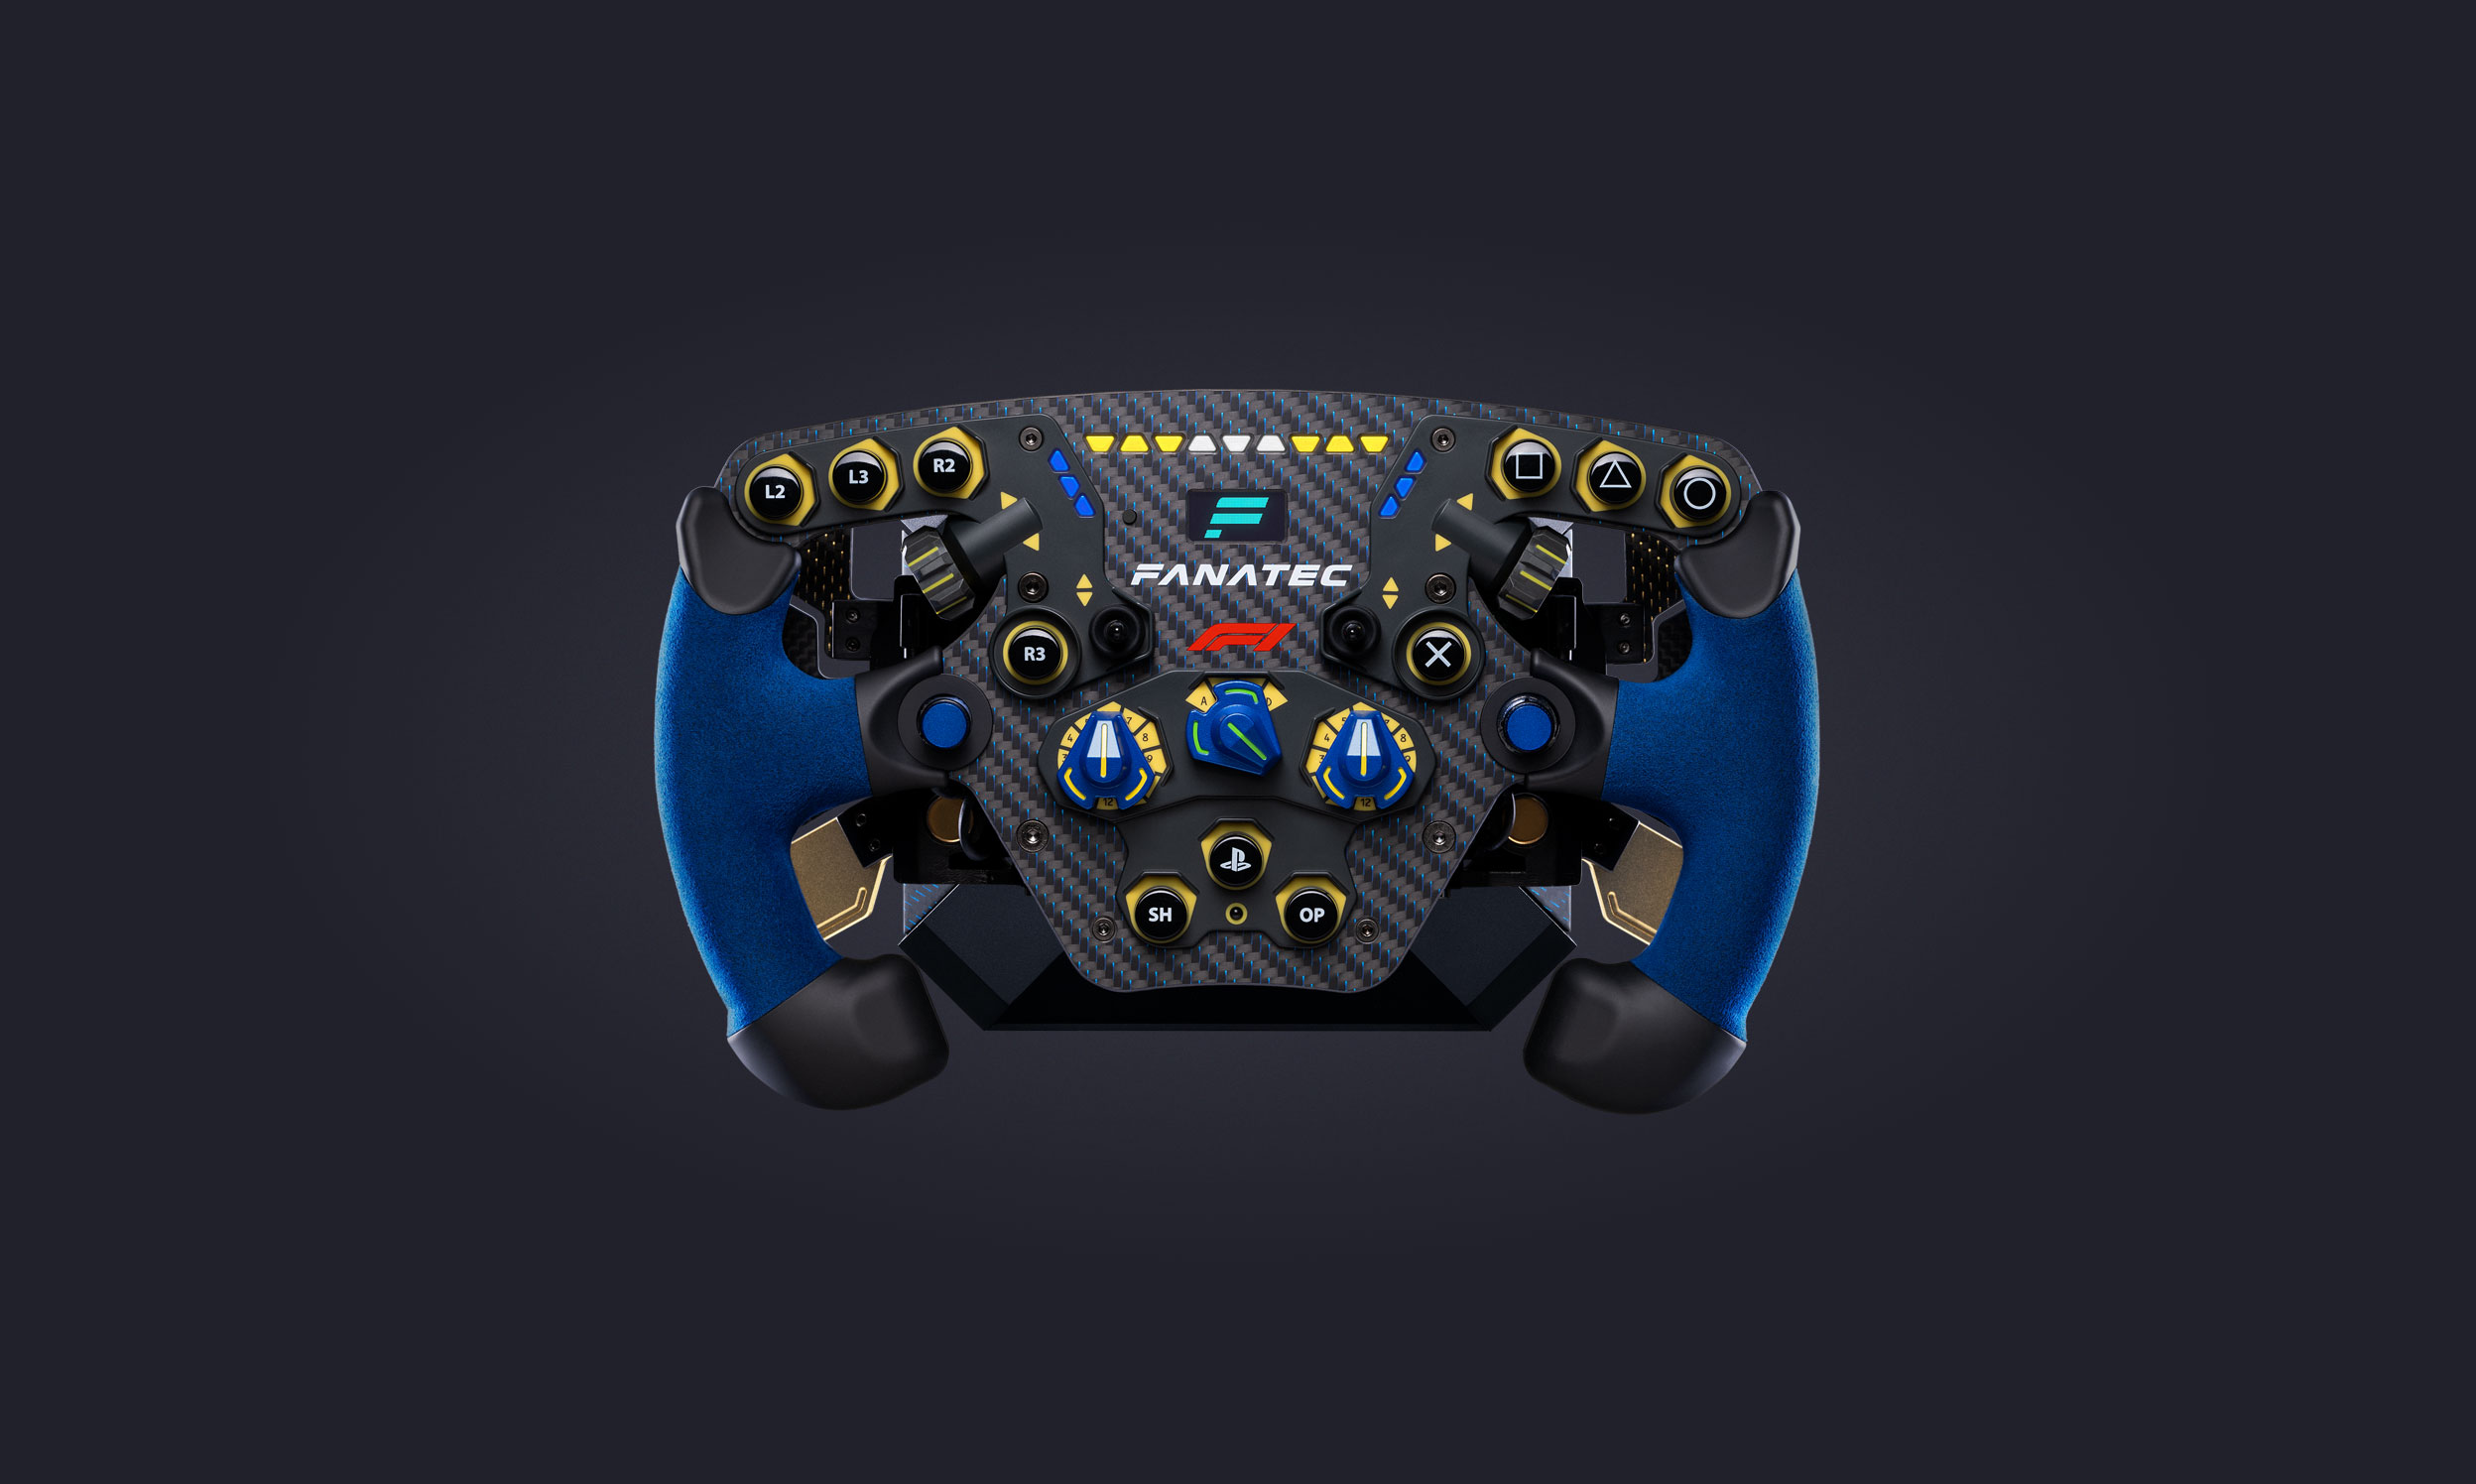 Citron Klage kan ikke se Podium Racing Wheel F1® - officially licenced for PS4™ | Fanatec